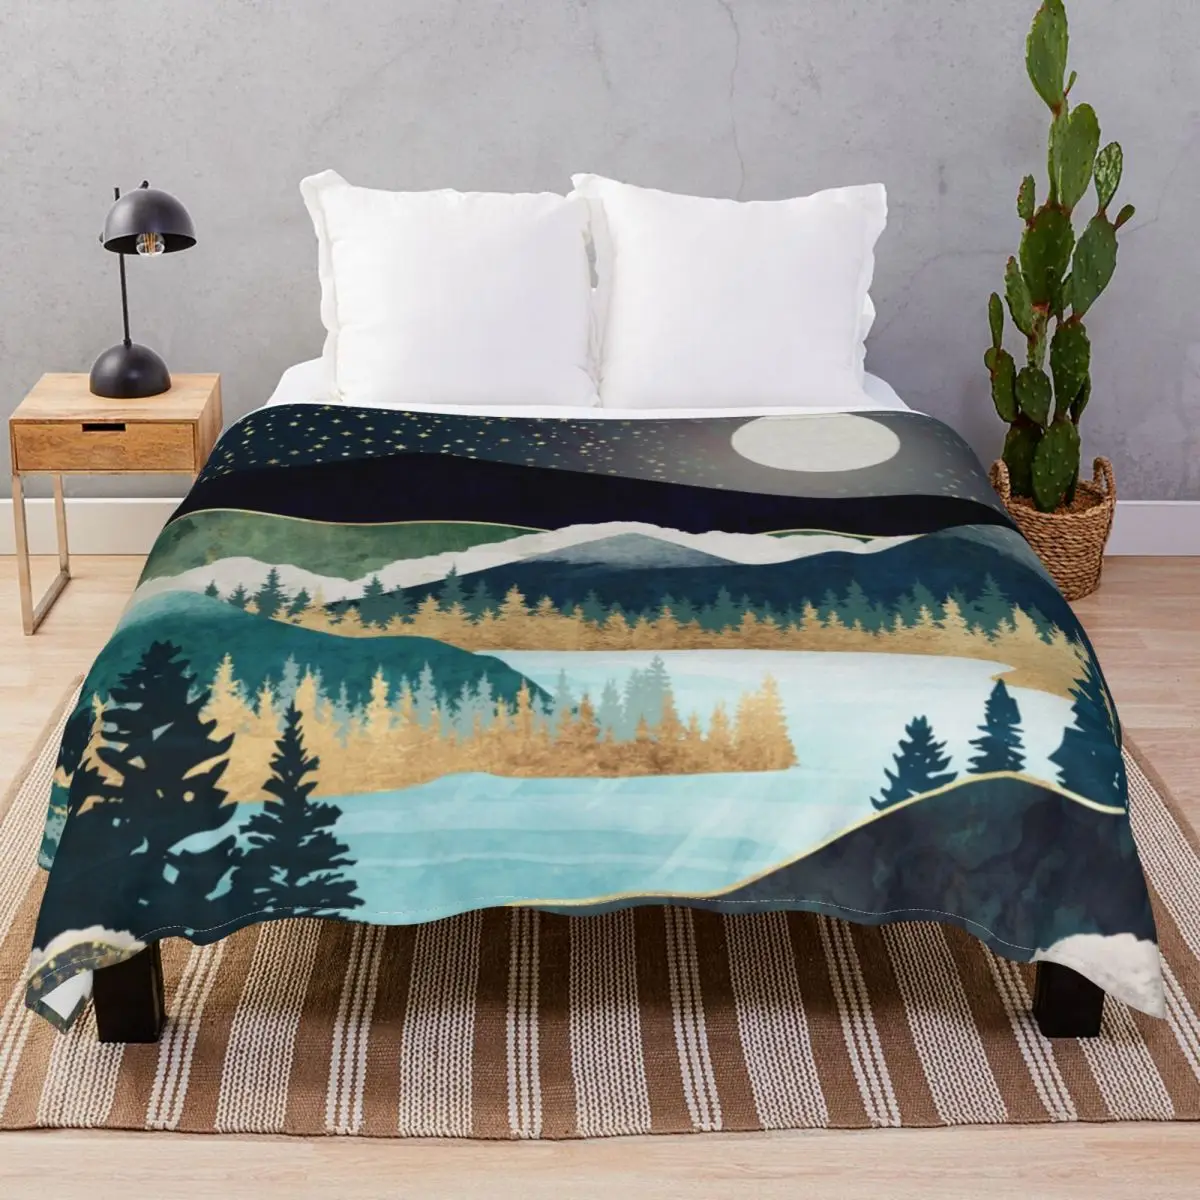 Star Lake Blanket Flannel Summer Breathable Throw Blankets for Bed Home Couch Travel Cinema